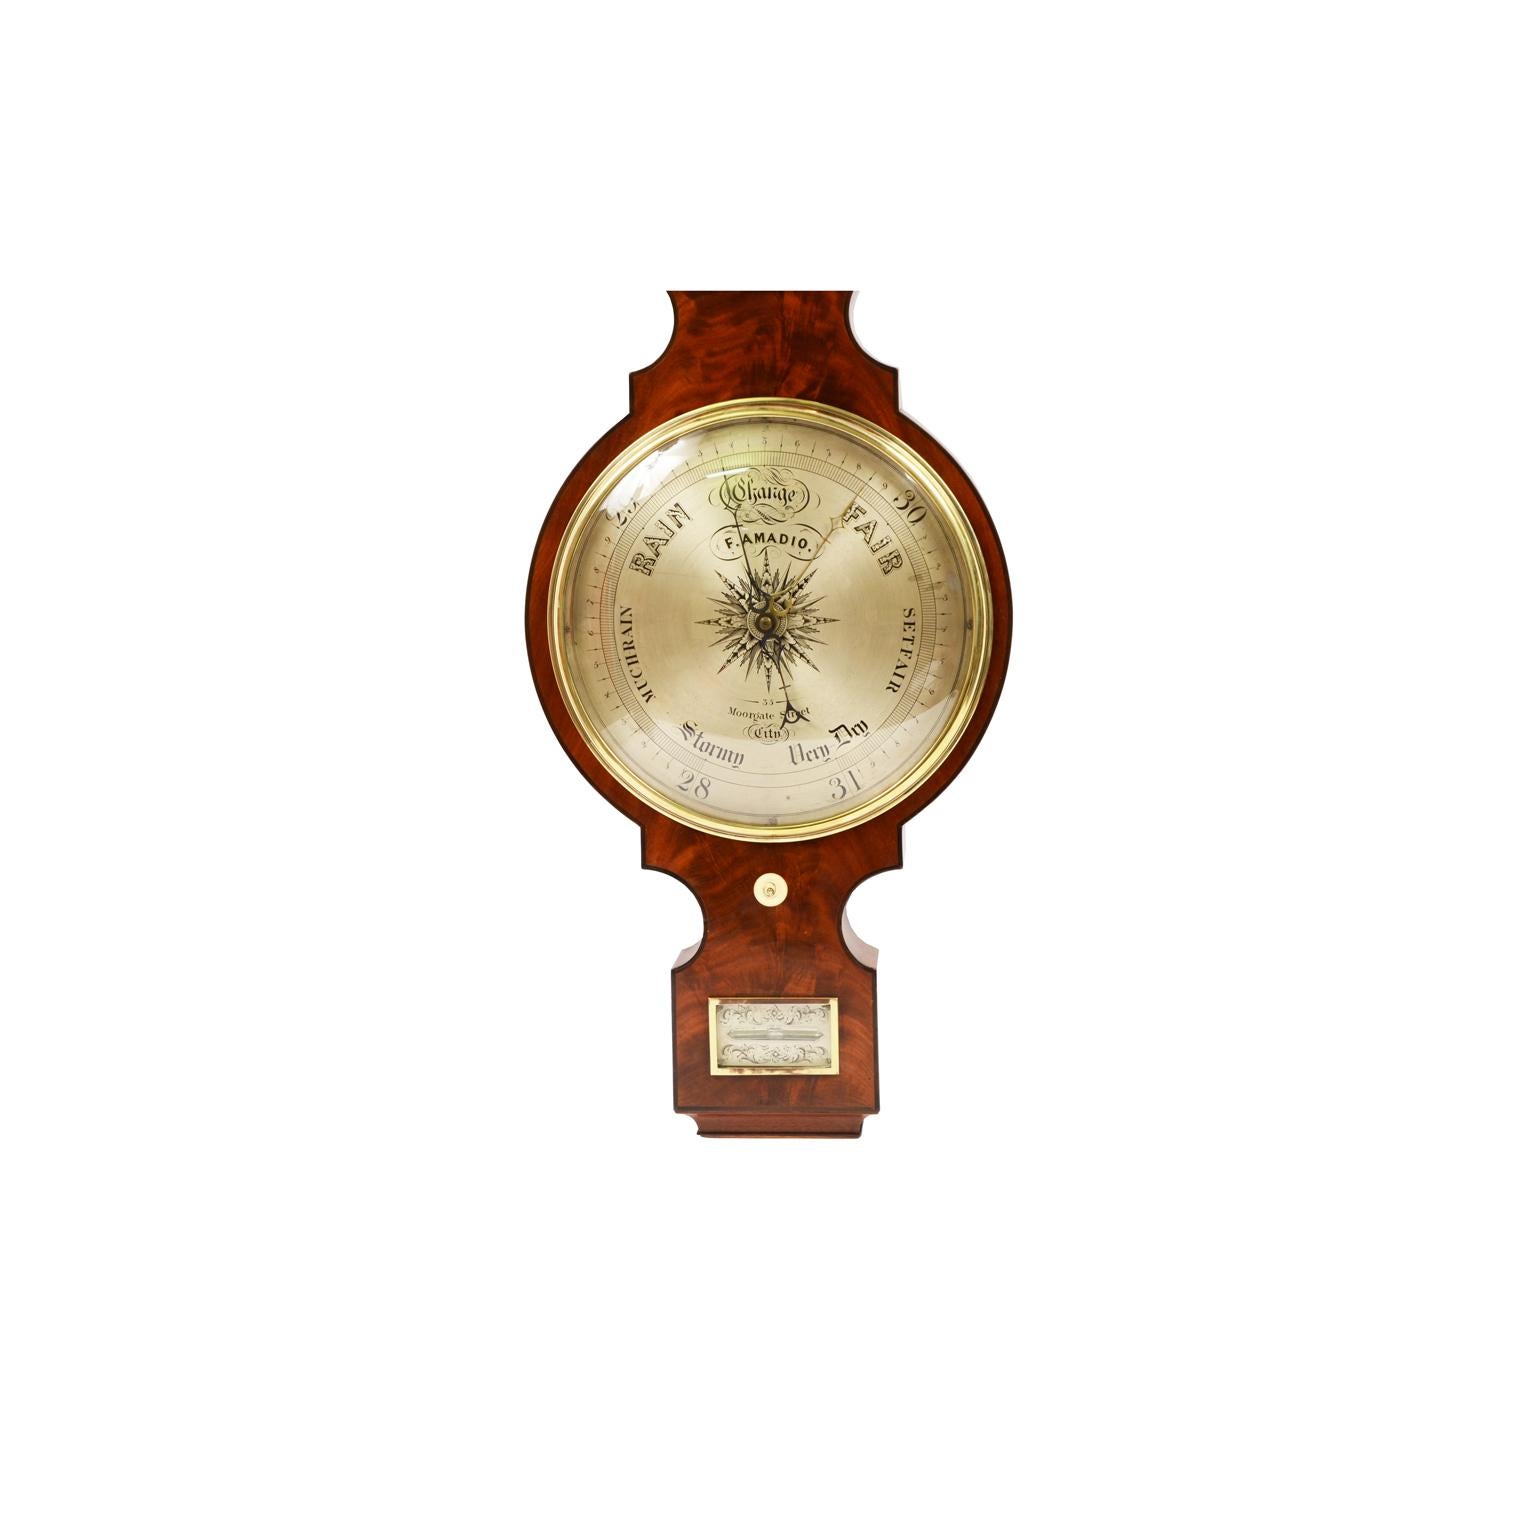 Rare large barometer complete with clock signed F. Amadio 35 Moorgate Street London active at this address between 1842 and 1851. Case of mahogany wood and finely worked mahogany root. Large silver-plated brass dial engraved with meteorological